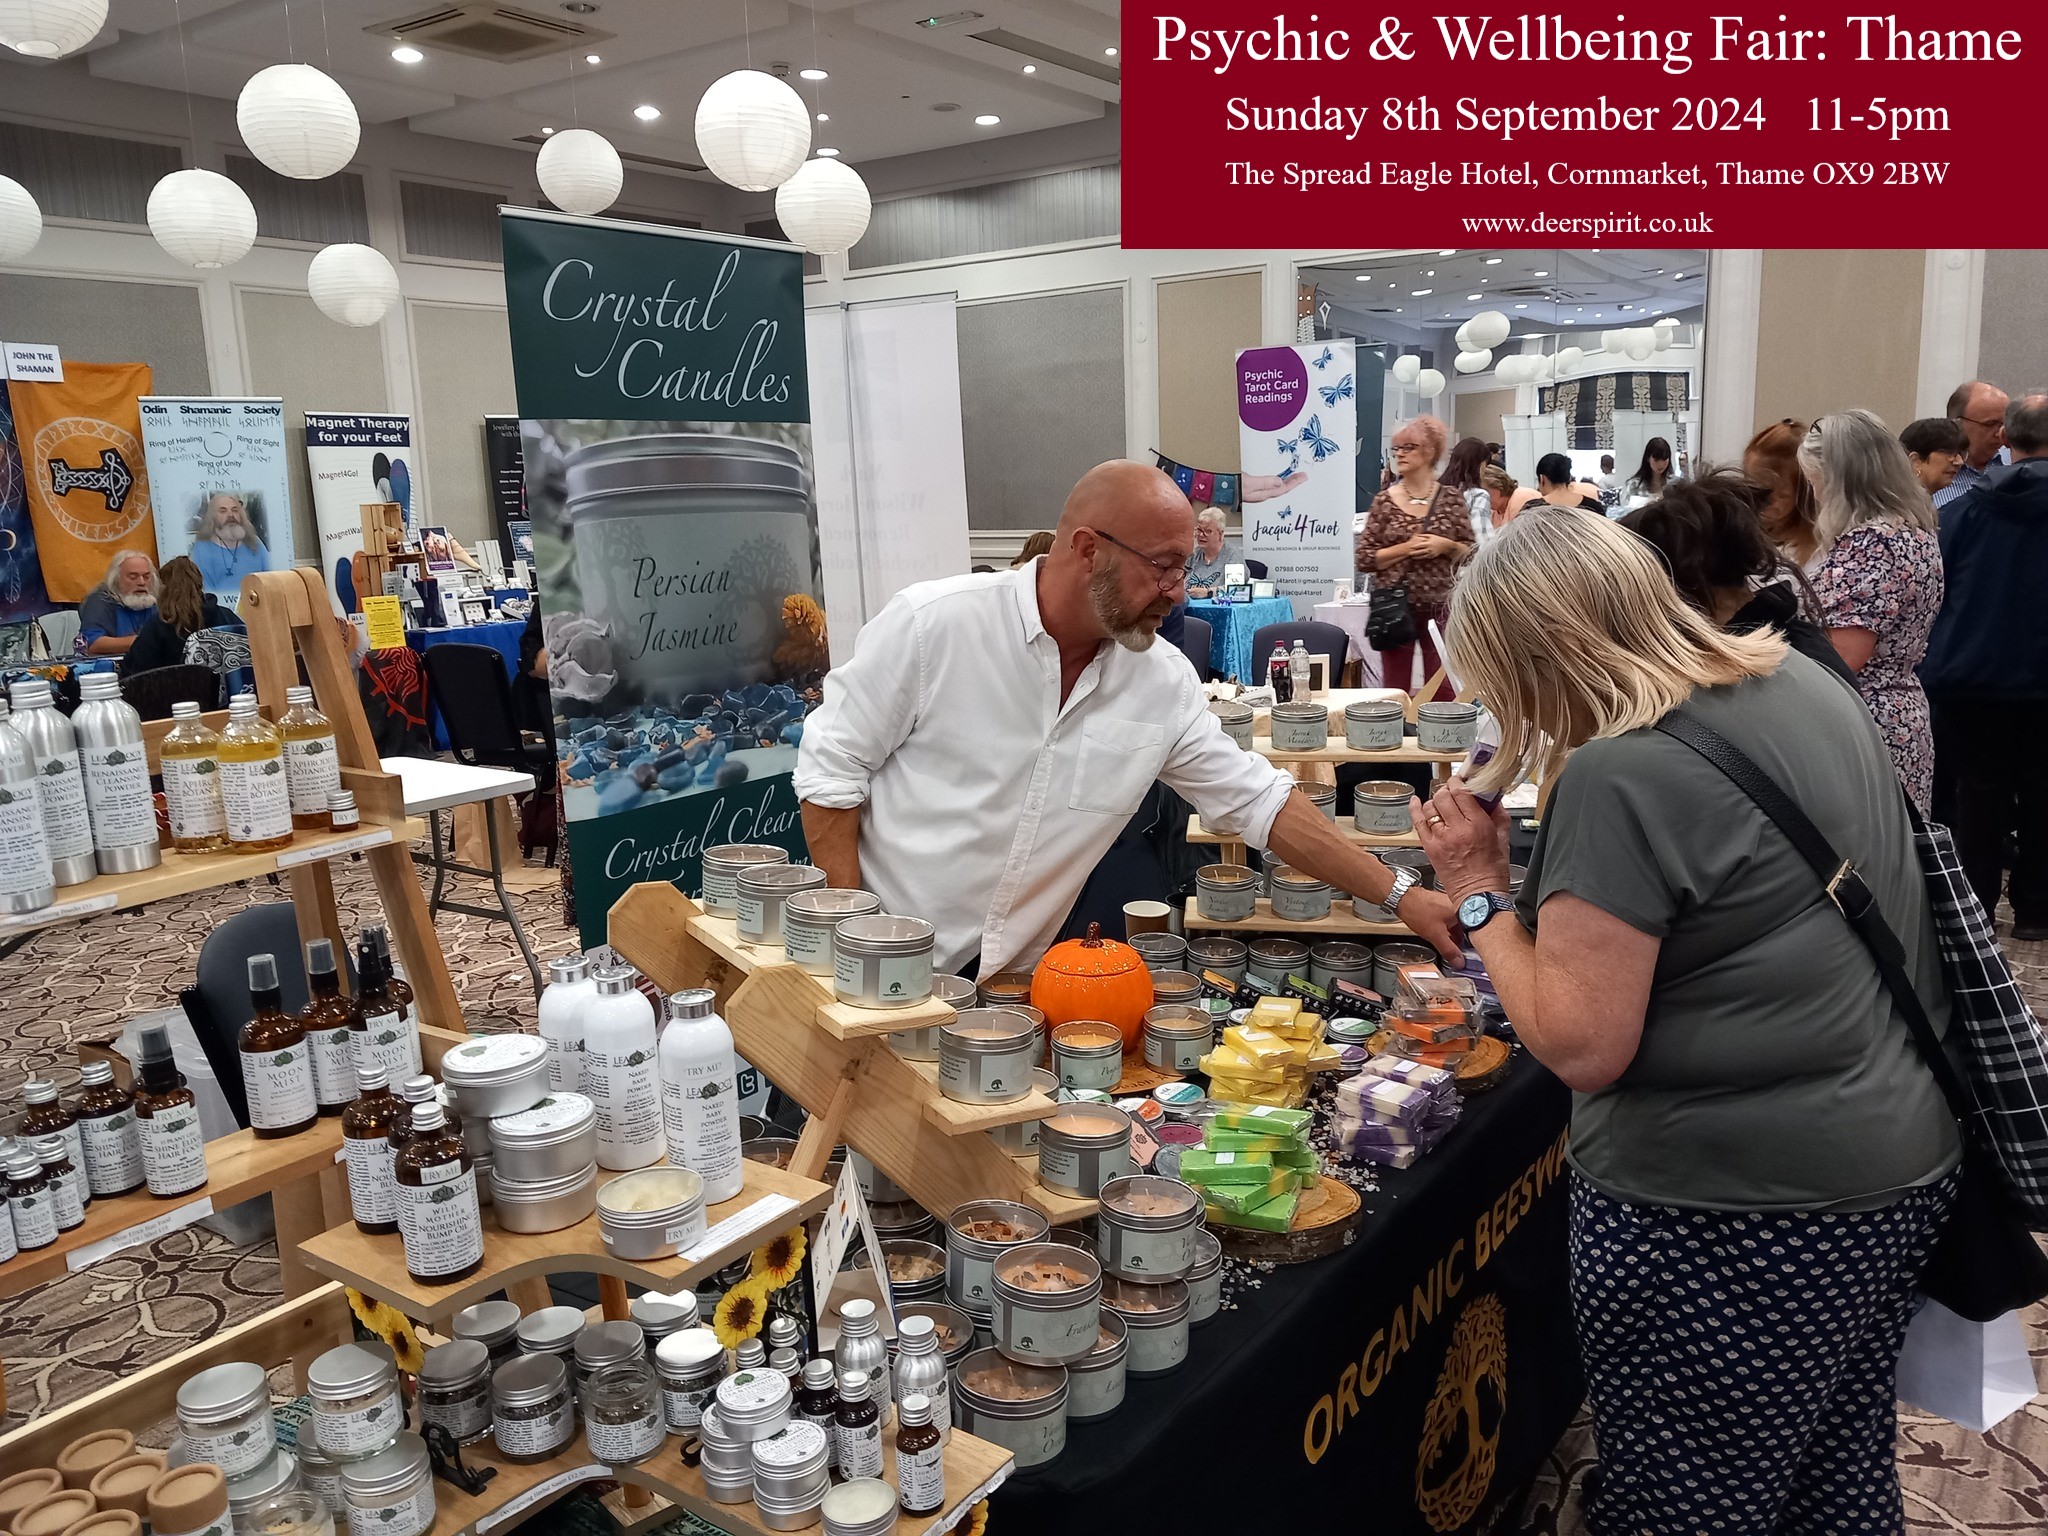 Thame's Autumn Psychic & Wellbeing Fair